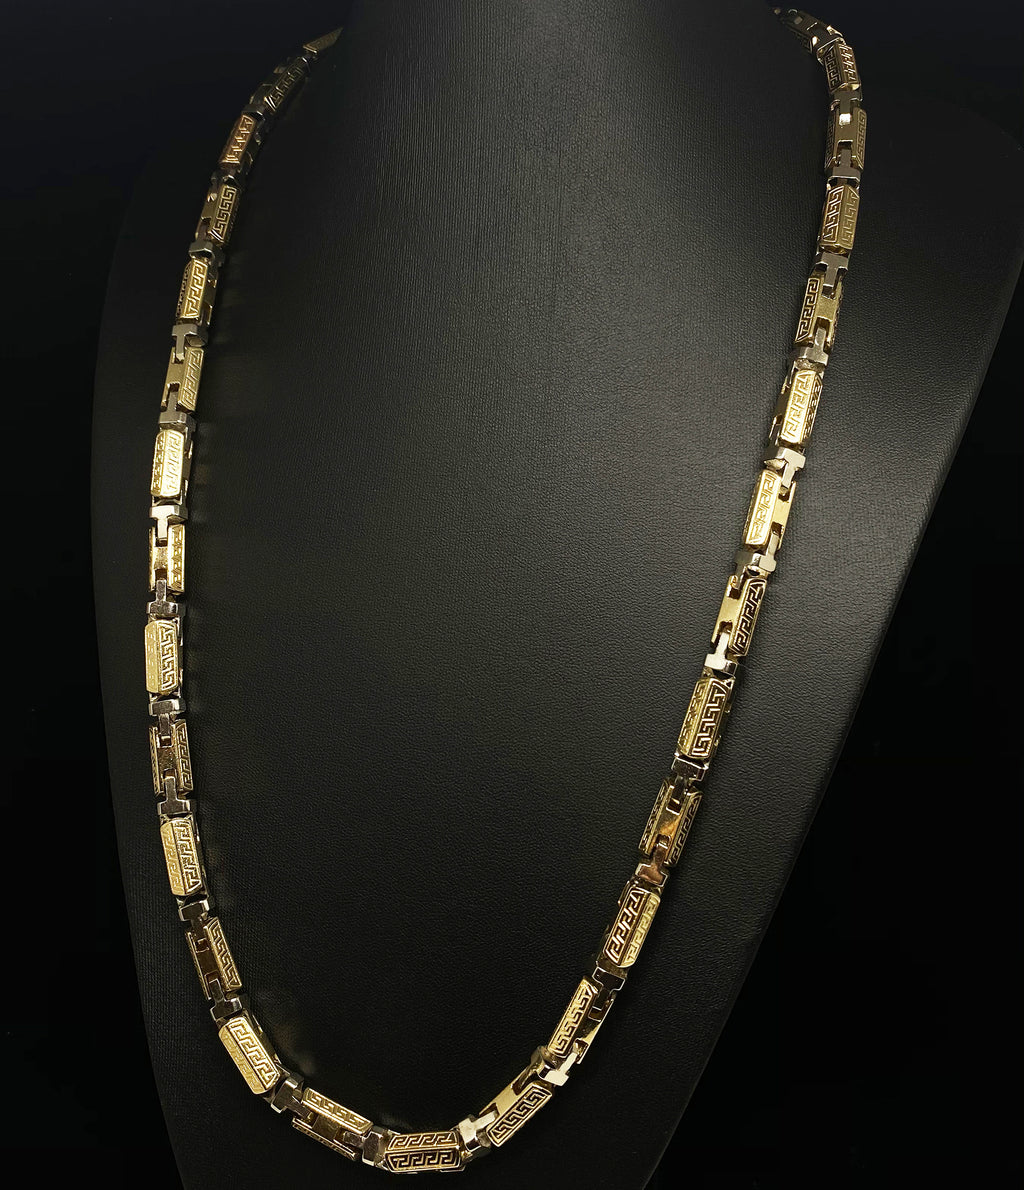 VERSACE STYLE TWO-TONE BULLET CHAIN